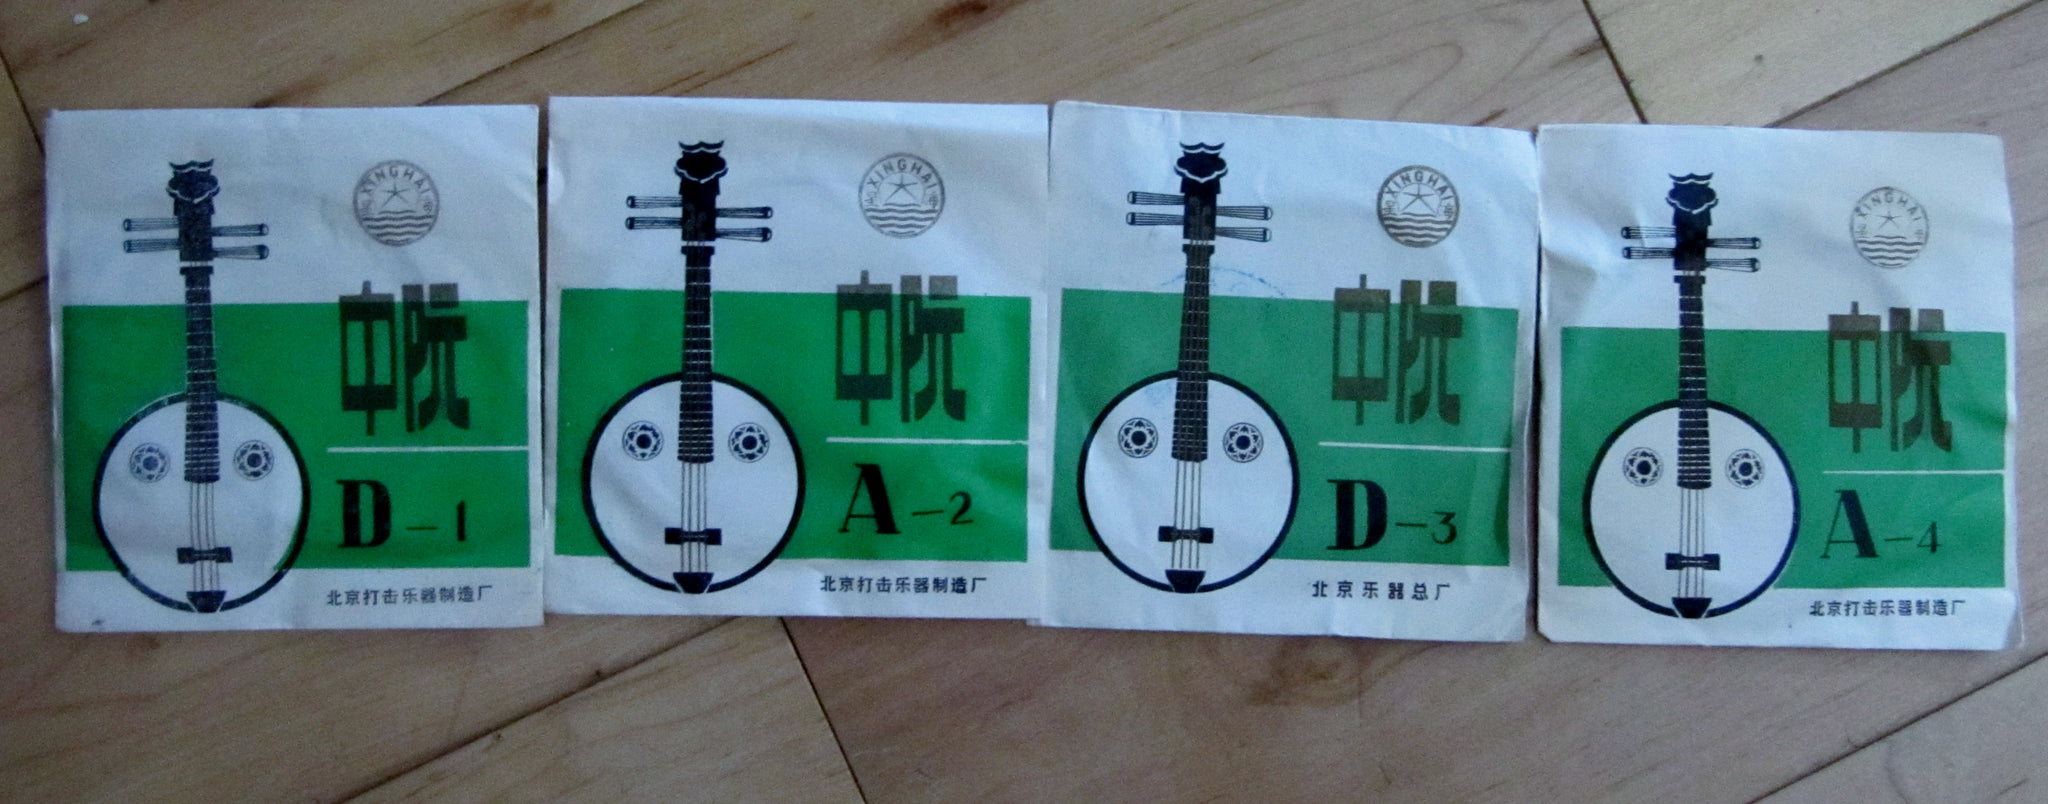 Strings for Zhong-Ruan (Chinese lute, alto Ruan), whole set (4 pieces) 中阮弦（套）Free shipping